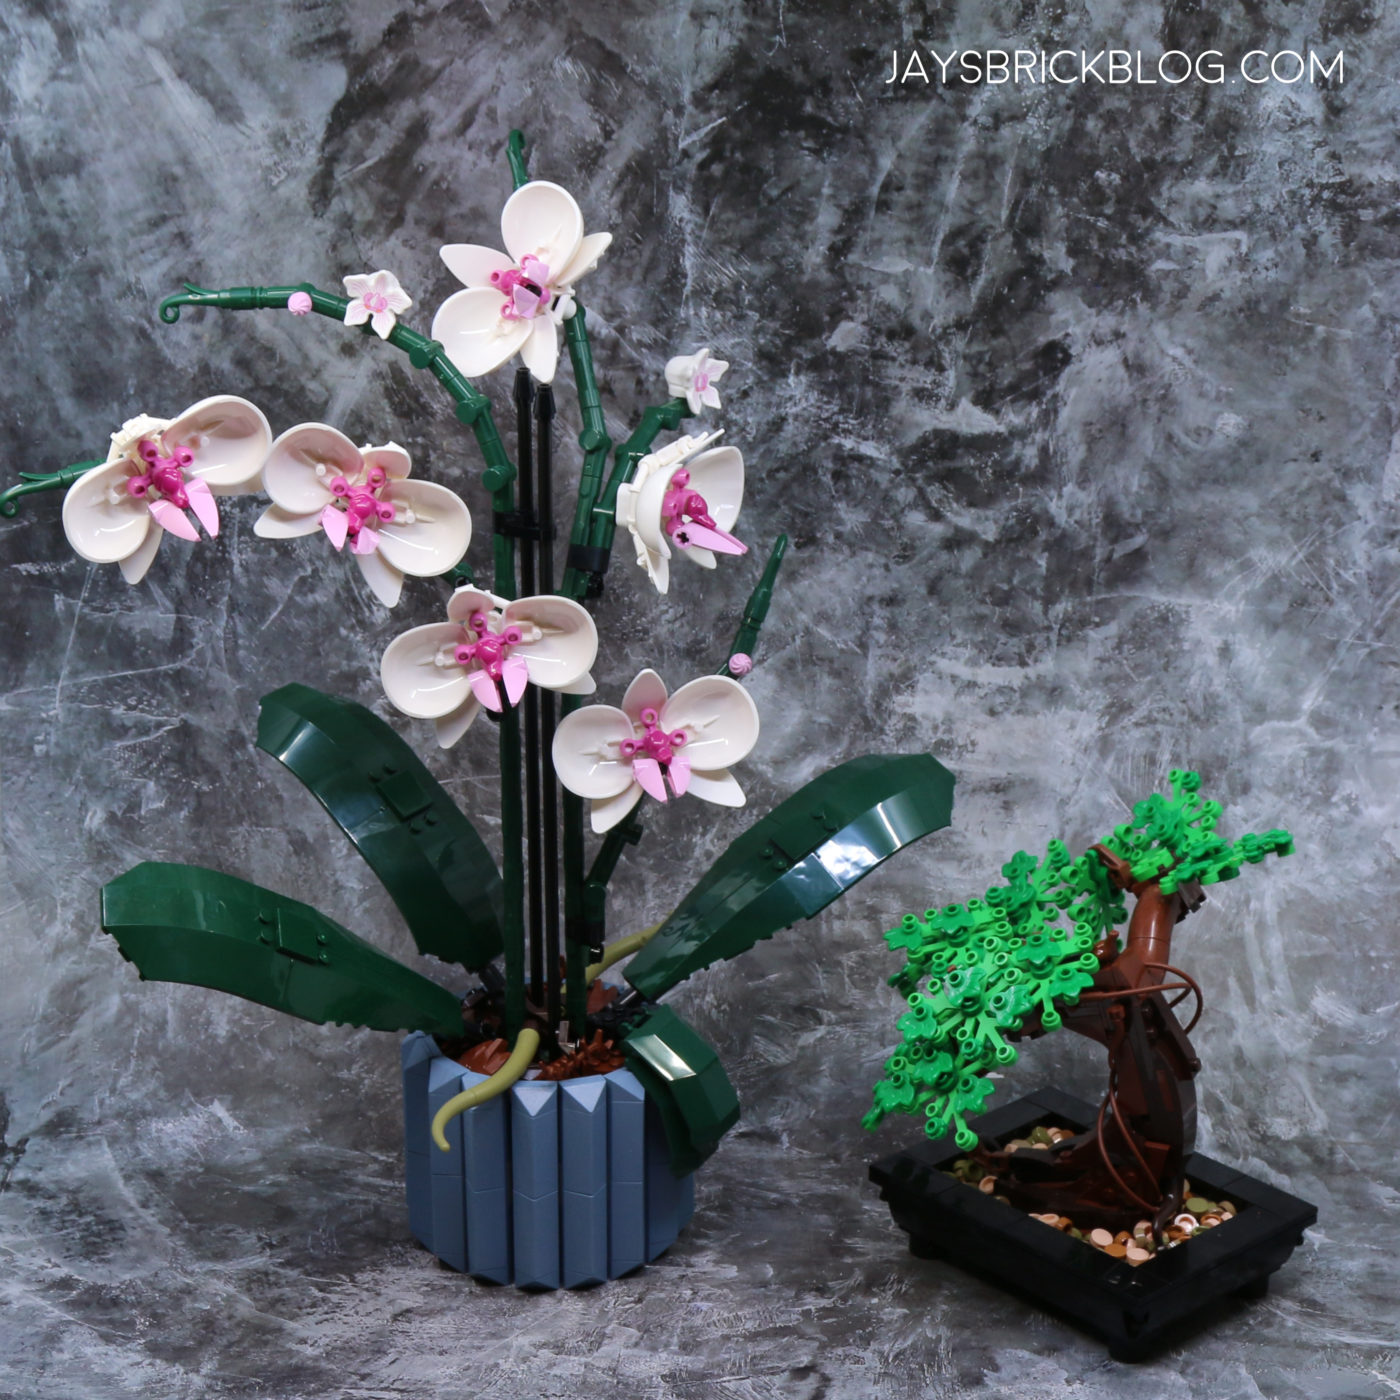 LEGO Botanical Collection 10311 Orchid - beauty comes in many shapes  [Review] - The Brothers Brick